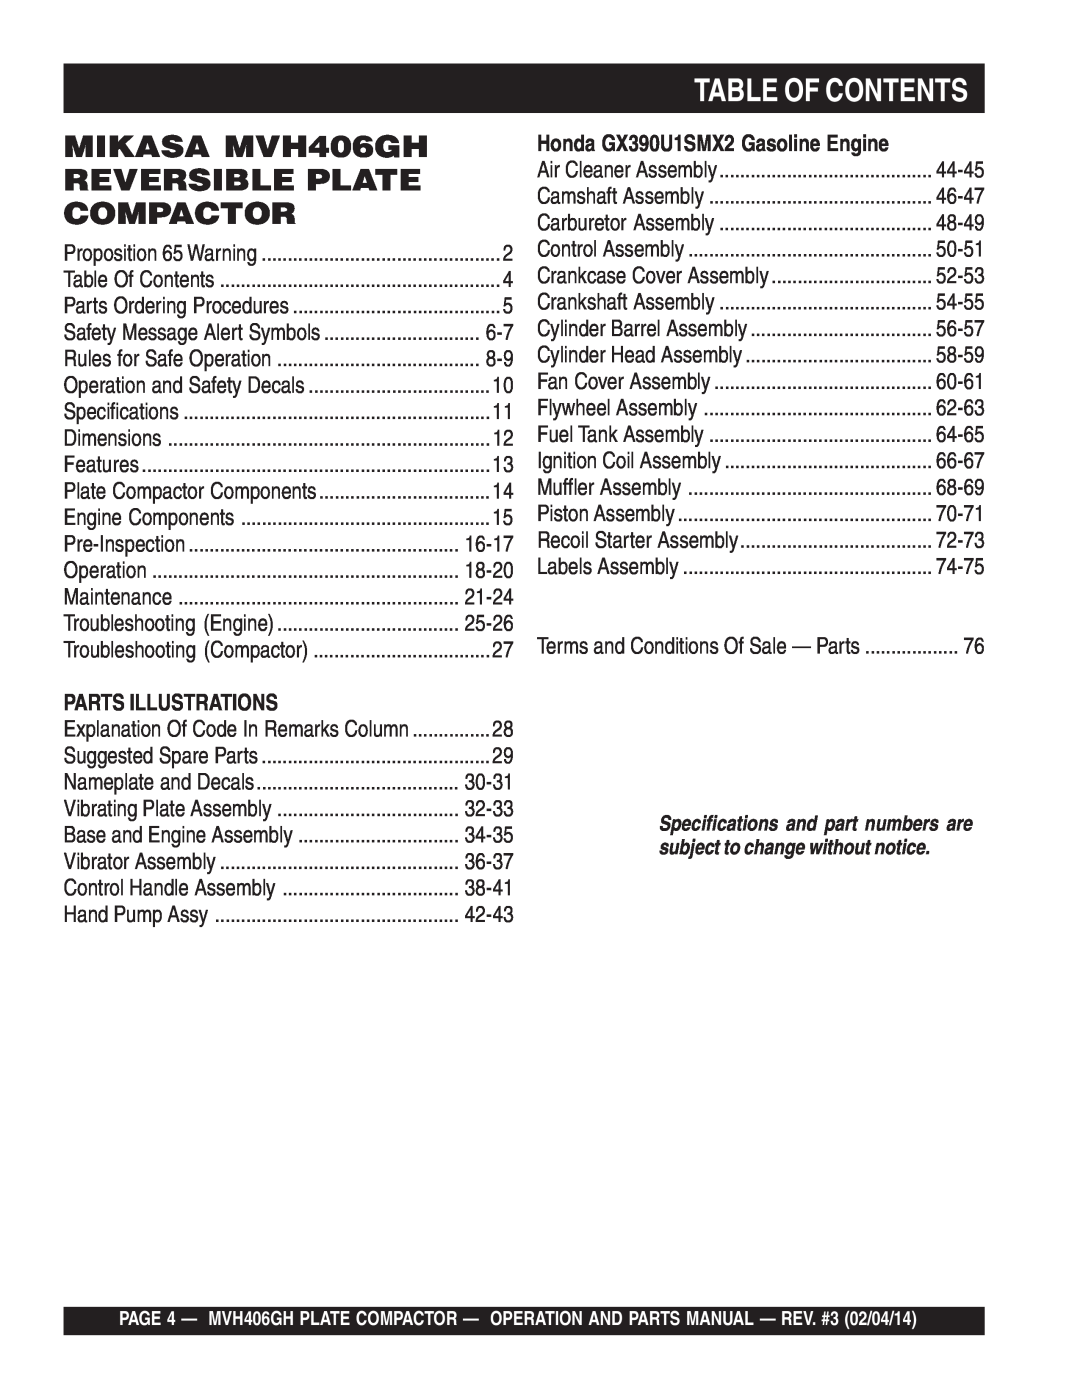 Multiquip manual Table Of Contents, MIKASA MVH406GH, Reversible Plate, Compactor, Parts Illustrations 